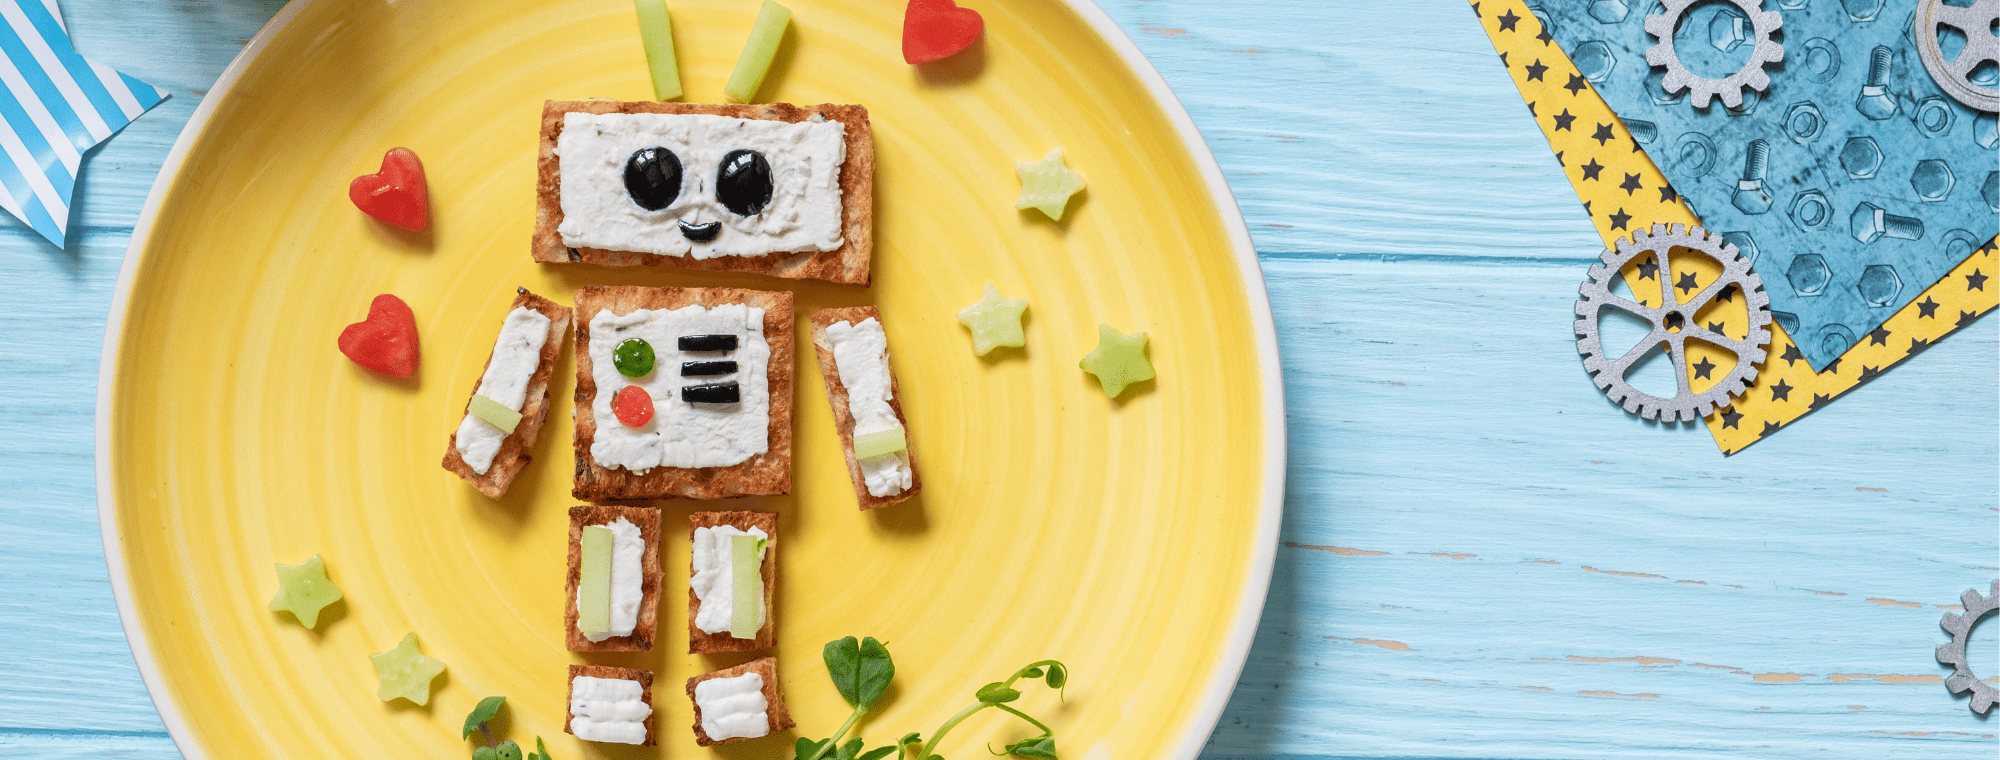 STEAM: 3 Genius Kitchen Science Projects for Kids